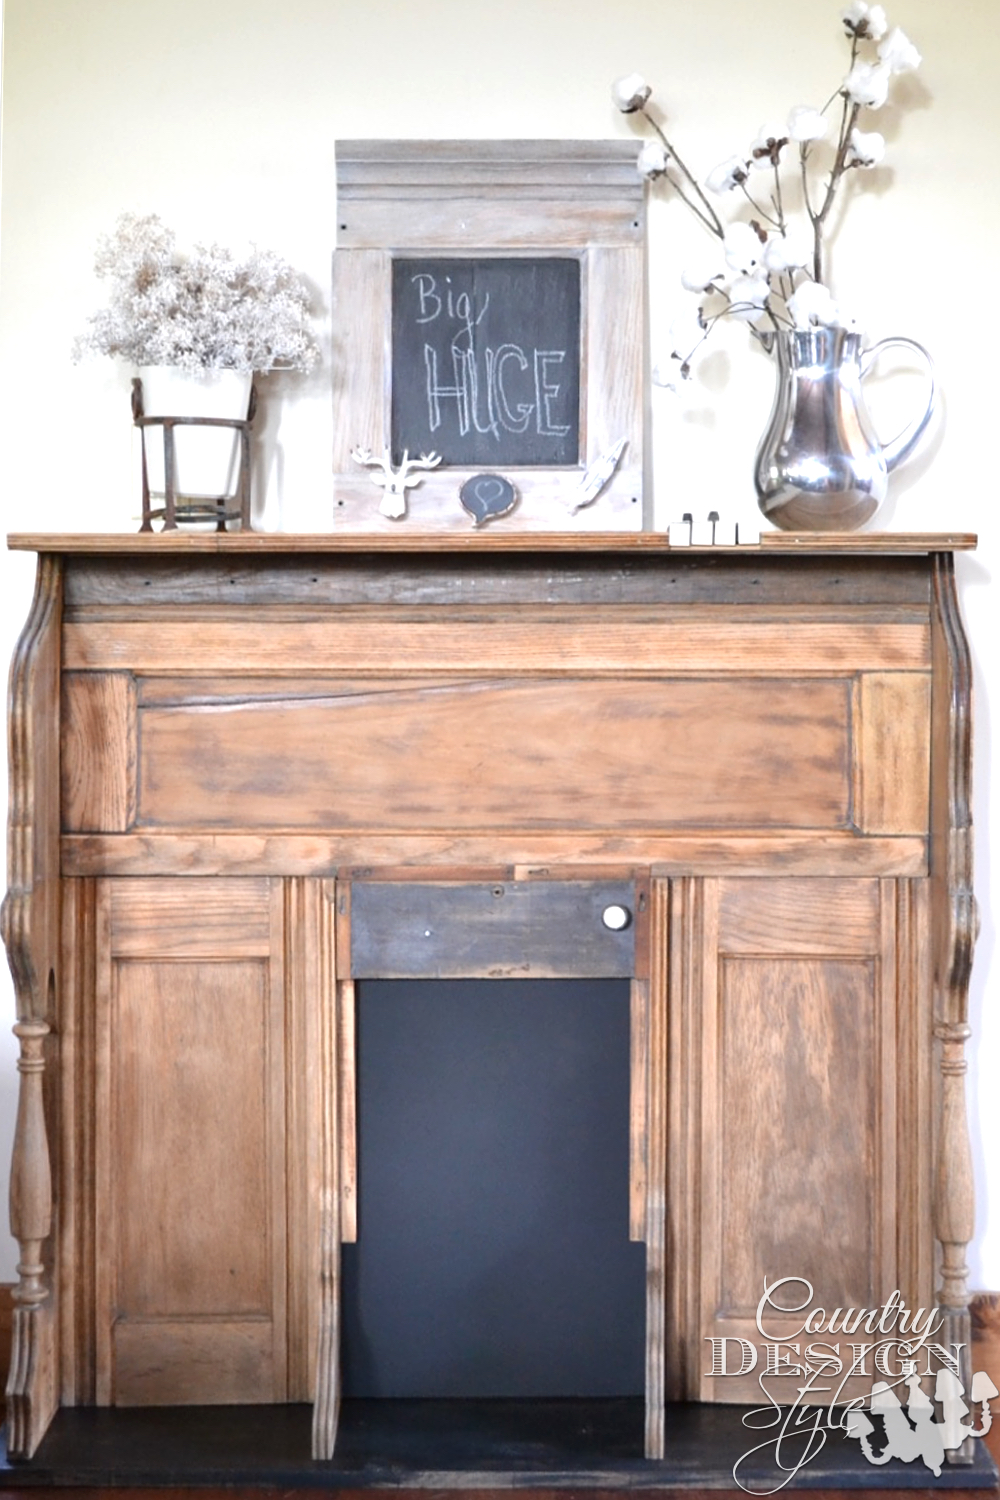 Organ remade into faux mantel with tutorial for inserting piano keys into top, chalkboard in firebox. Displayed with DIY cotton stems. | countrydesignstyle.com 